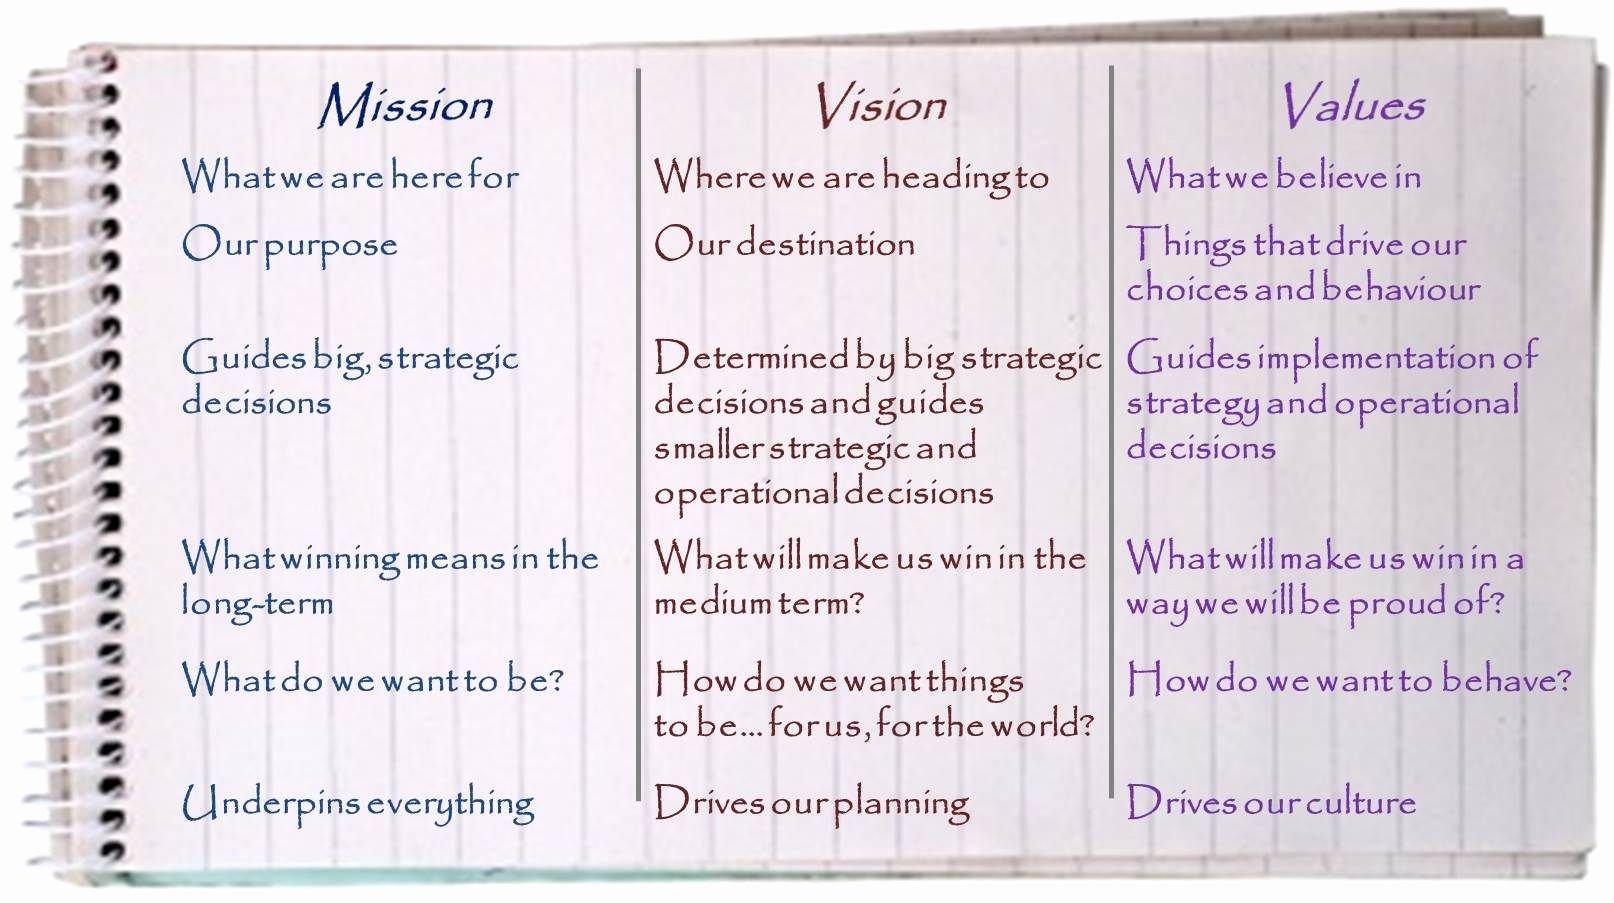 Personal Vision Statement Sample Unique Vision Statement Examples for Business Yahoo Image